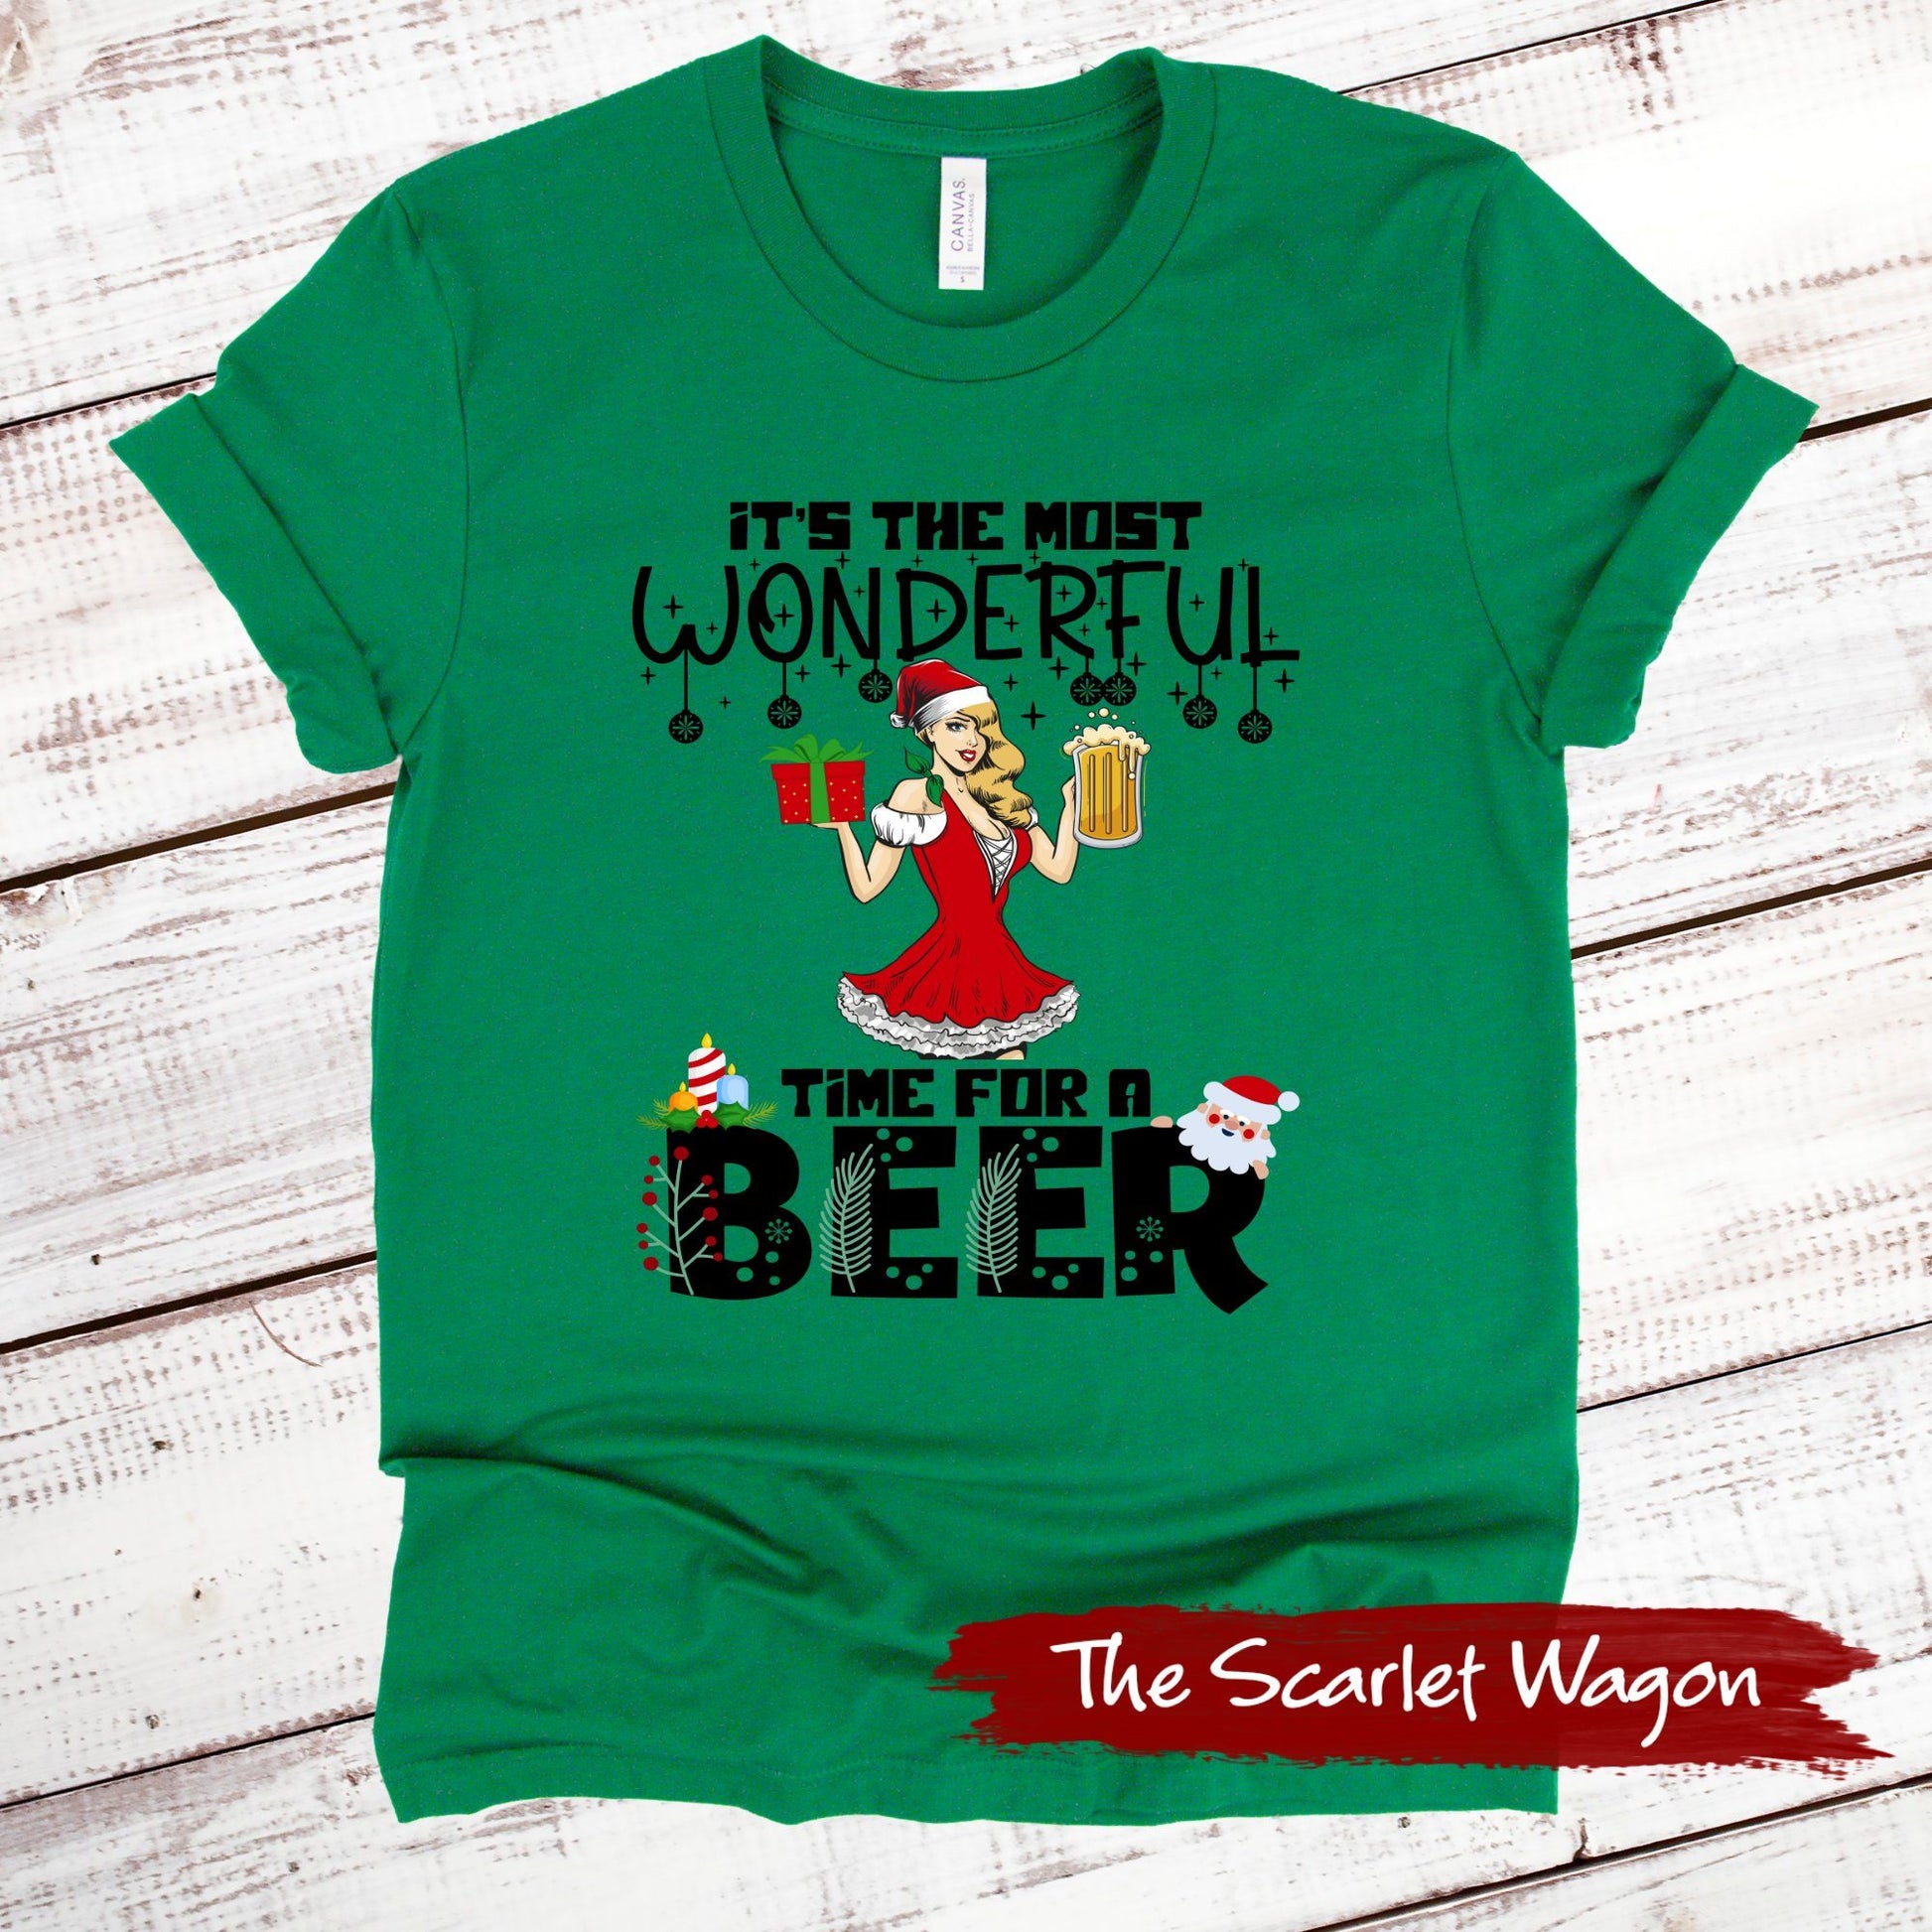 Most Wonderful Time for a Beer Christmas Shirt Scarlet Wagon Green XS 